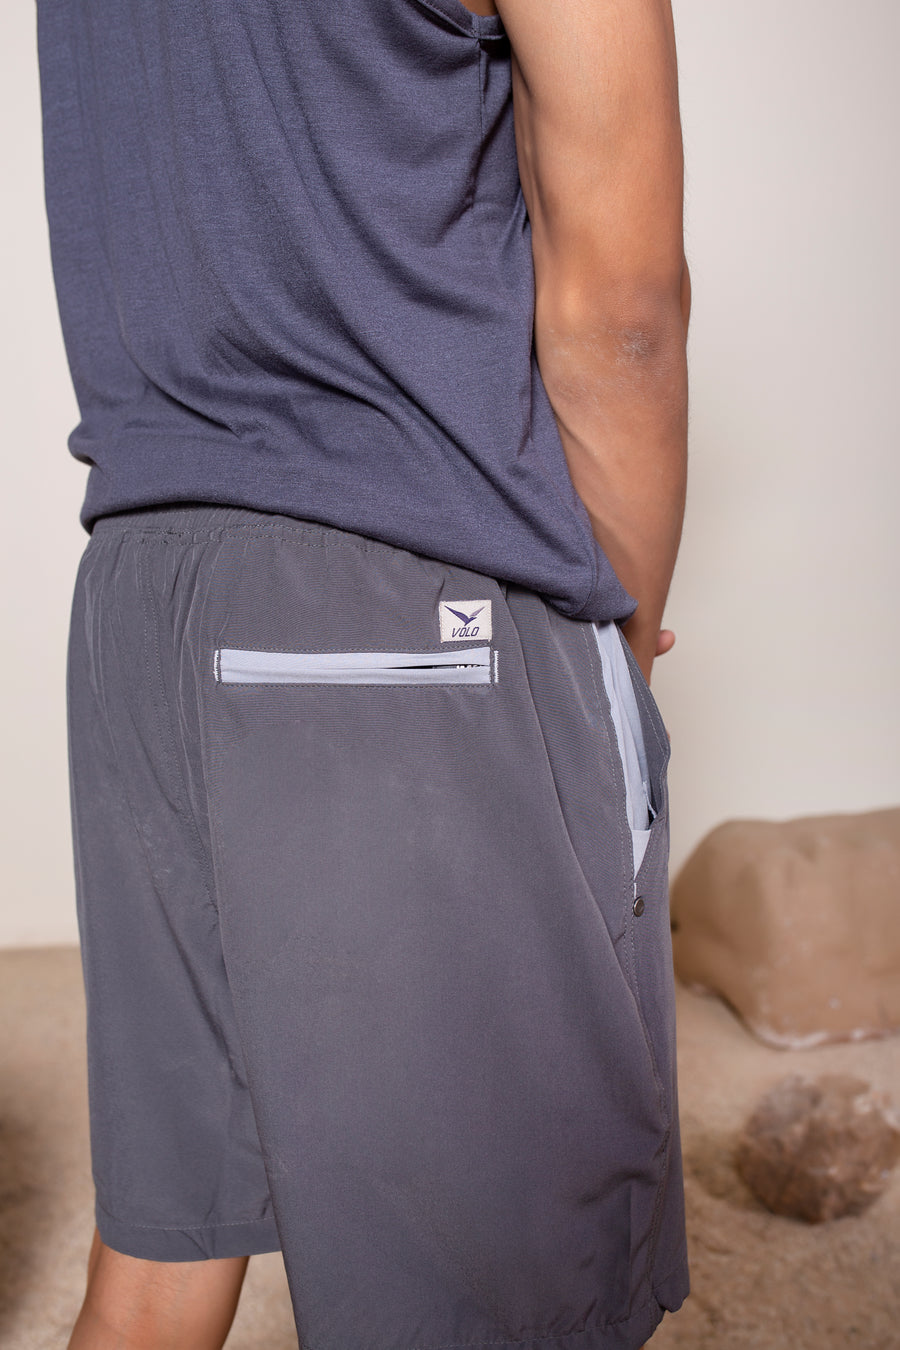 Men's Earth Shorts in Dark Gray | VOLO Apparel | Designed to fit into your active life without looking like athletic wear. Earth Shorts 2.0 come with a super strong ultralight microstretch fabric and a five pocket design. Two zipper pockets, a security pocket and super quick drying material. The shorts feature an internal drawstring and are reinforced stitched and ultra durable for all your adventures in or out of the city.